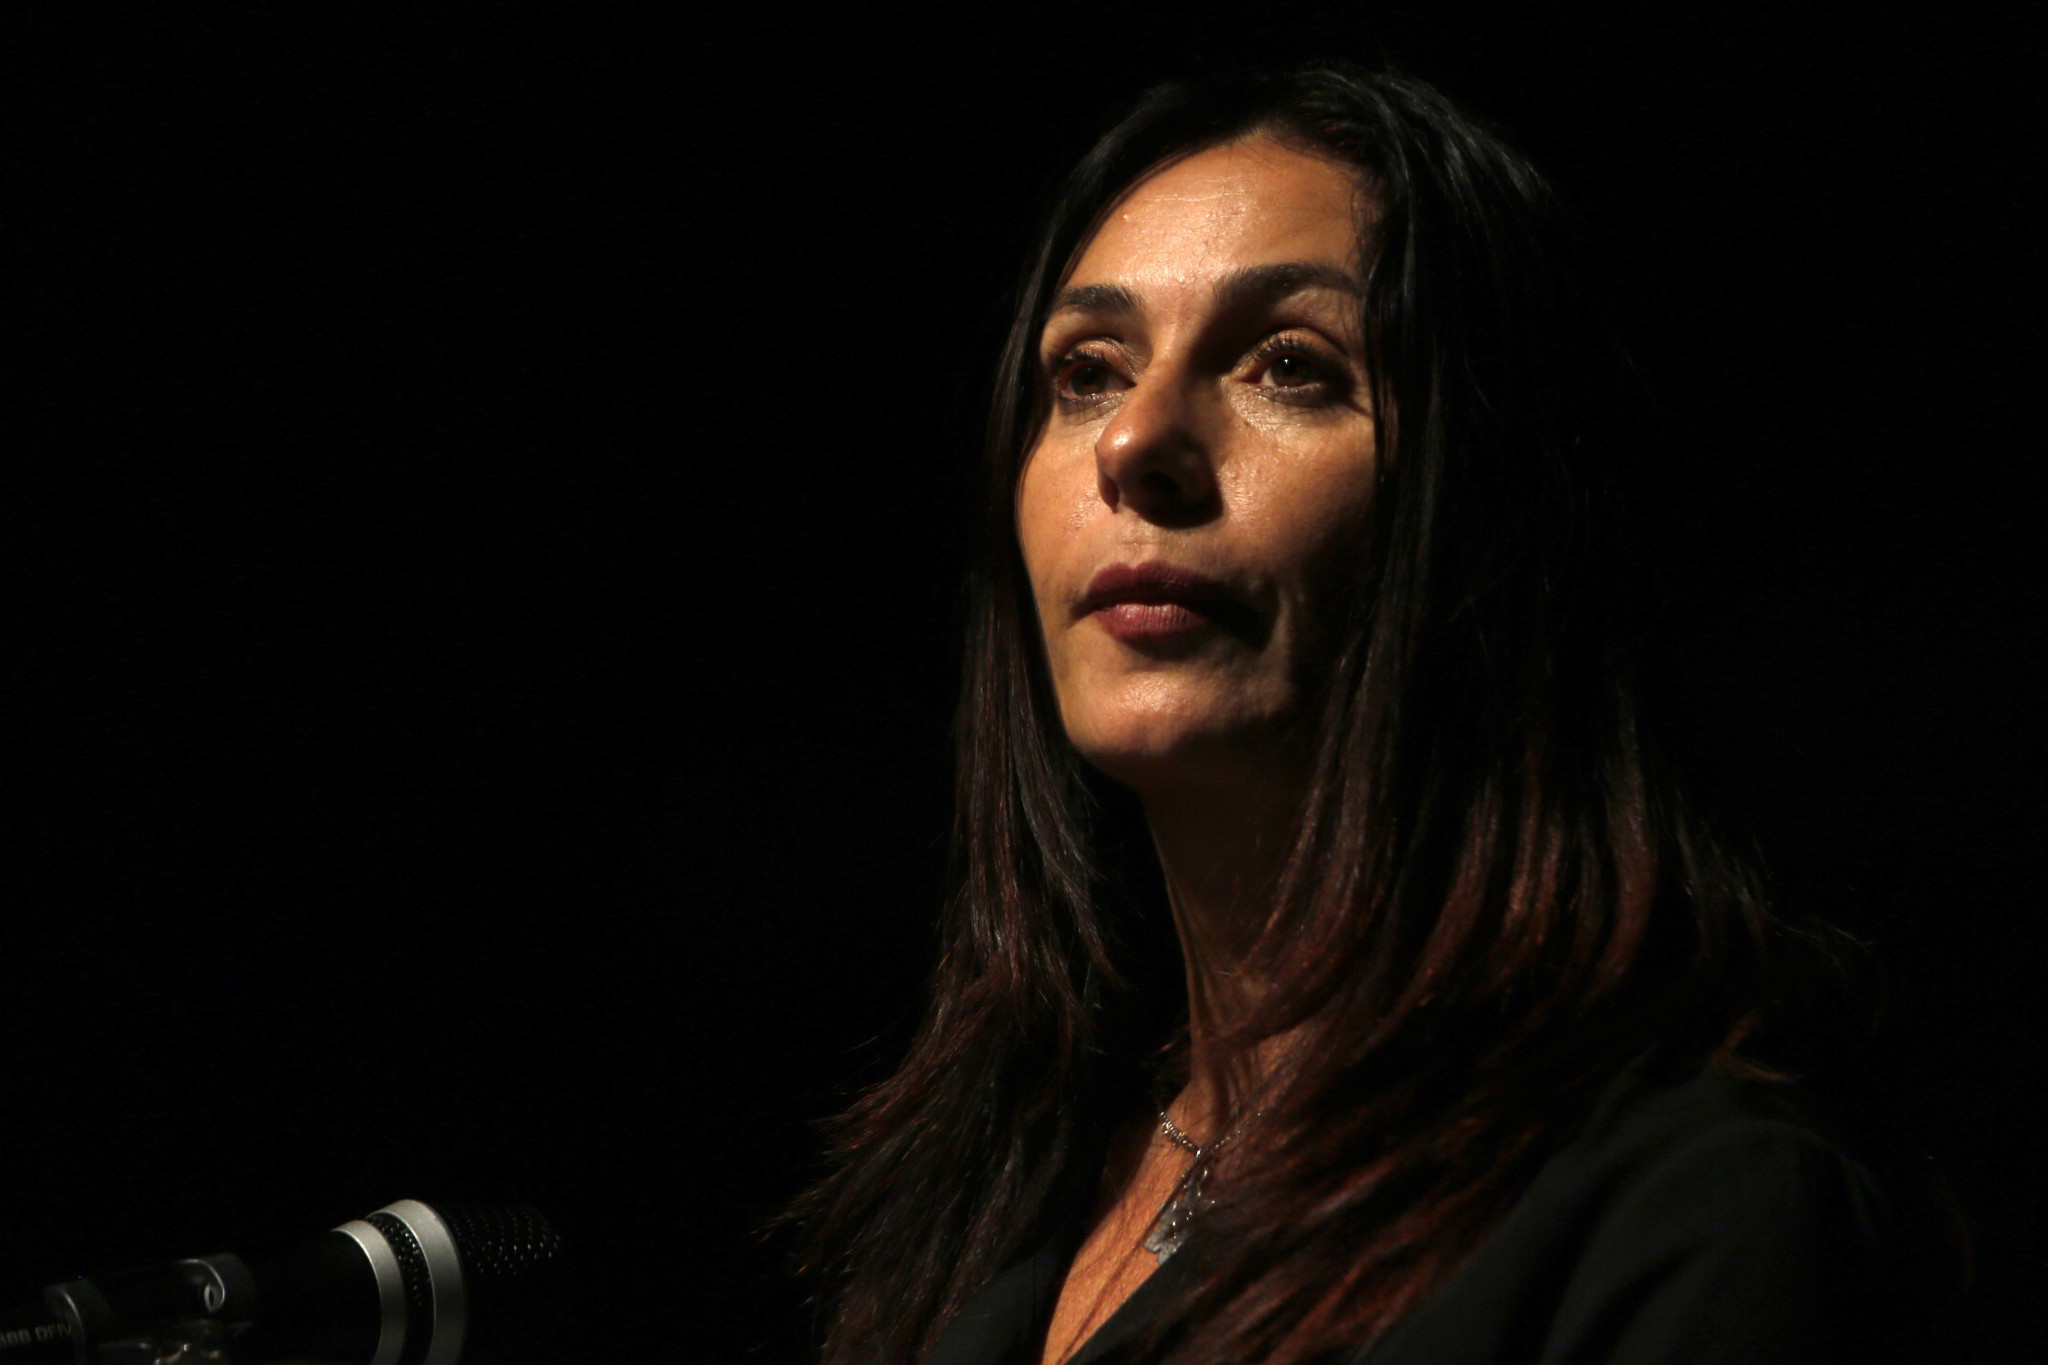 Israel's Culture and Sports Minister Miri Regev, who has written to the International Judo Federation about an alleged ban on Israeli symbols at the Abu Dhabi Grand Slam ©Getty Images